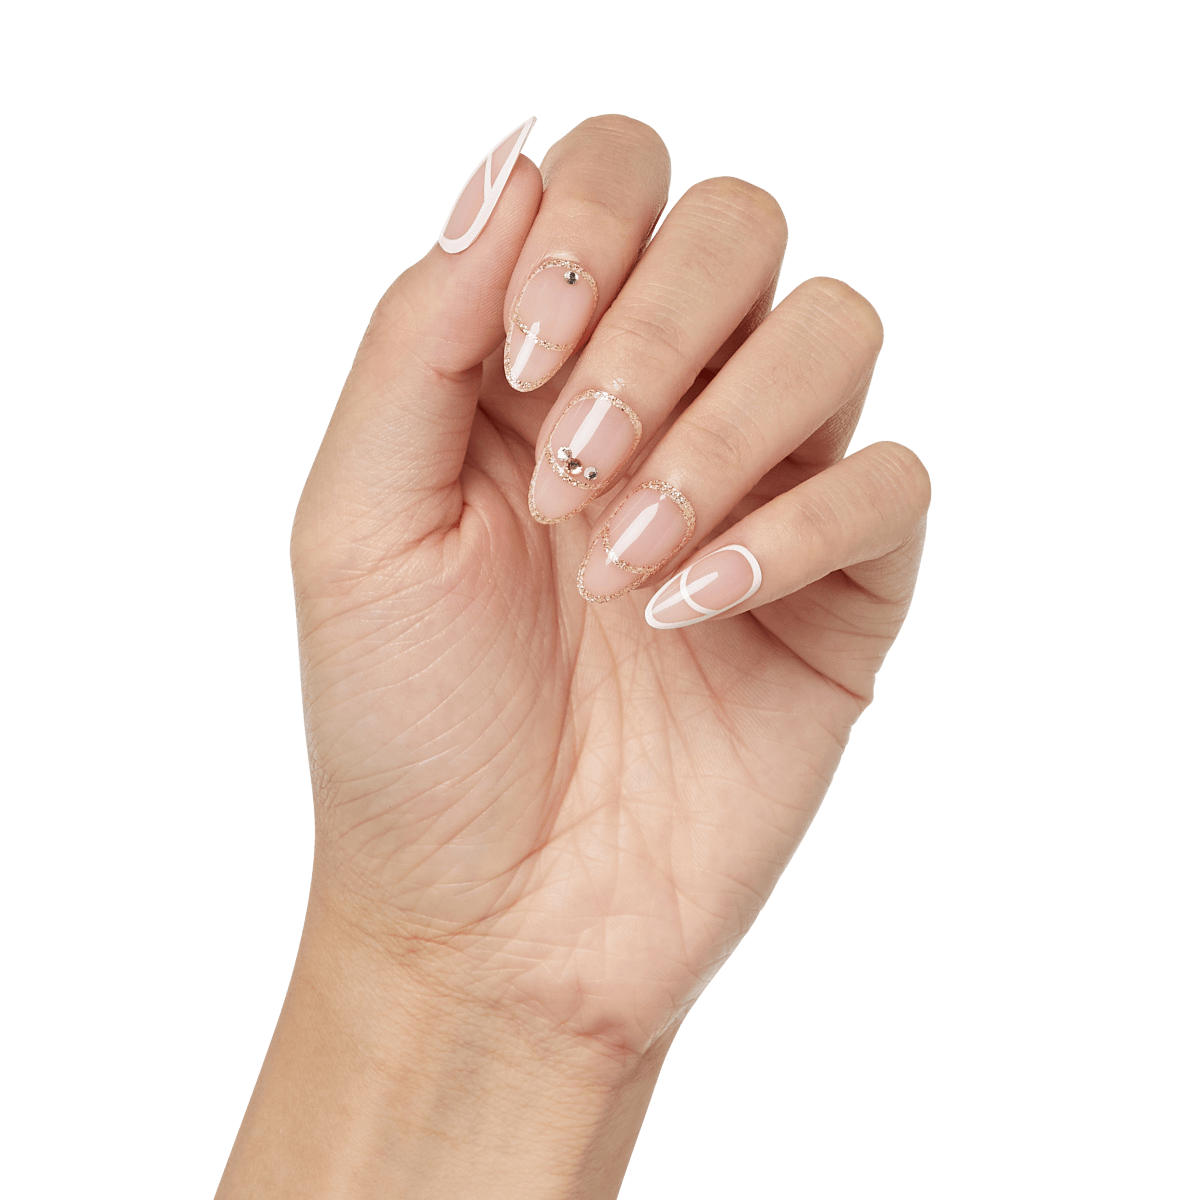 KISS Classy Nails, Press-On Nails, Over the Moon, Beige, Med Almond, 30ct